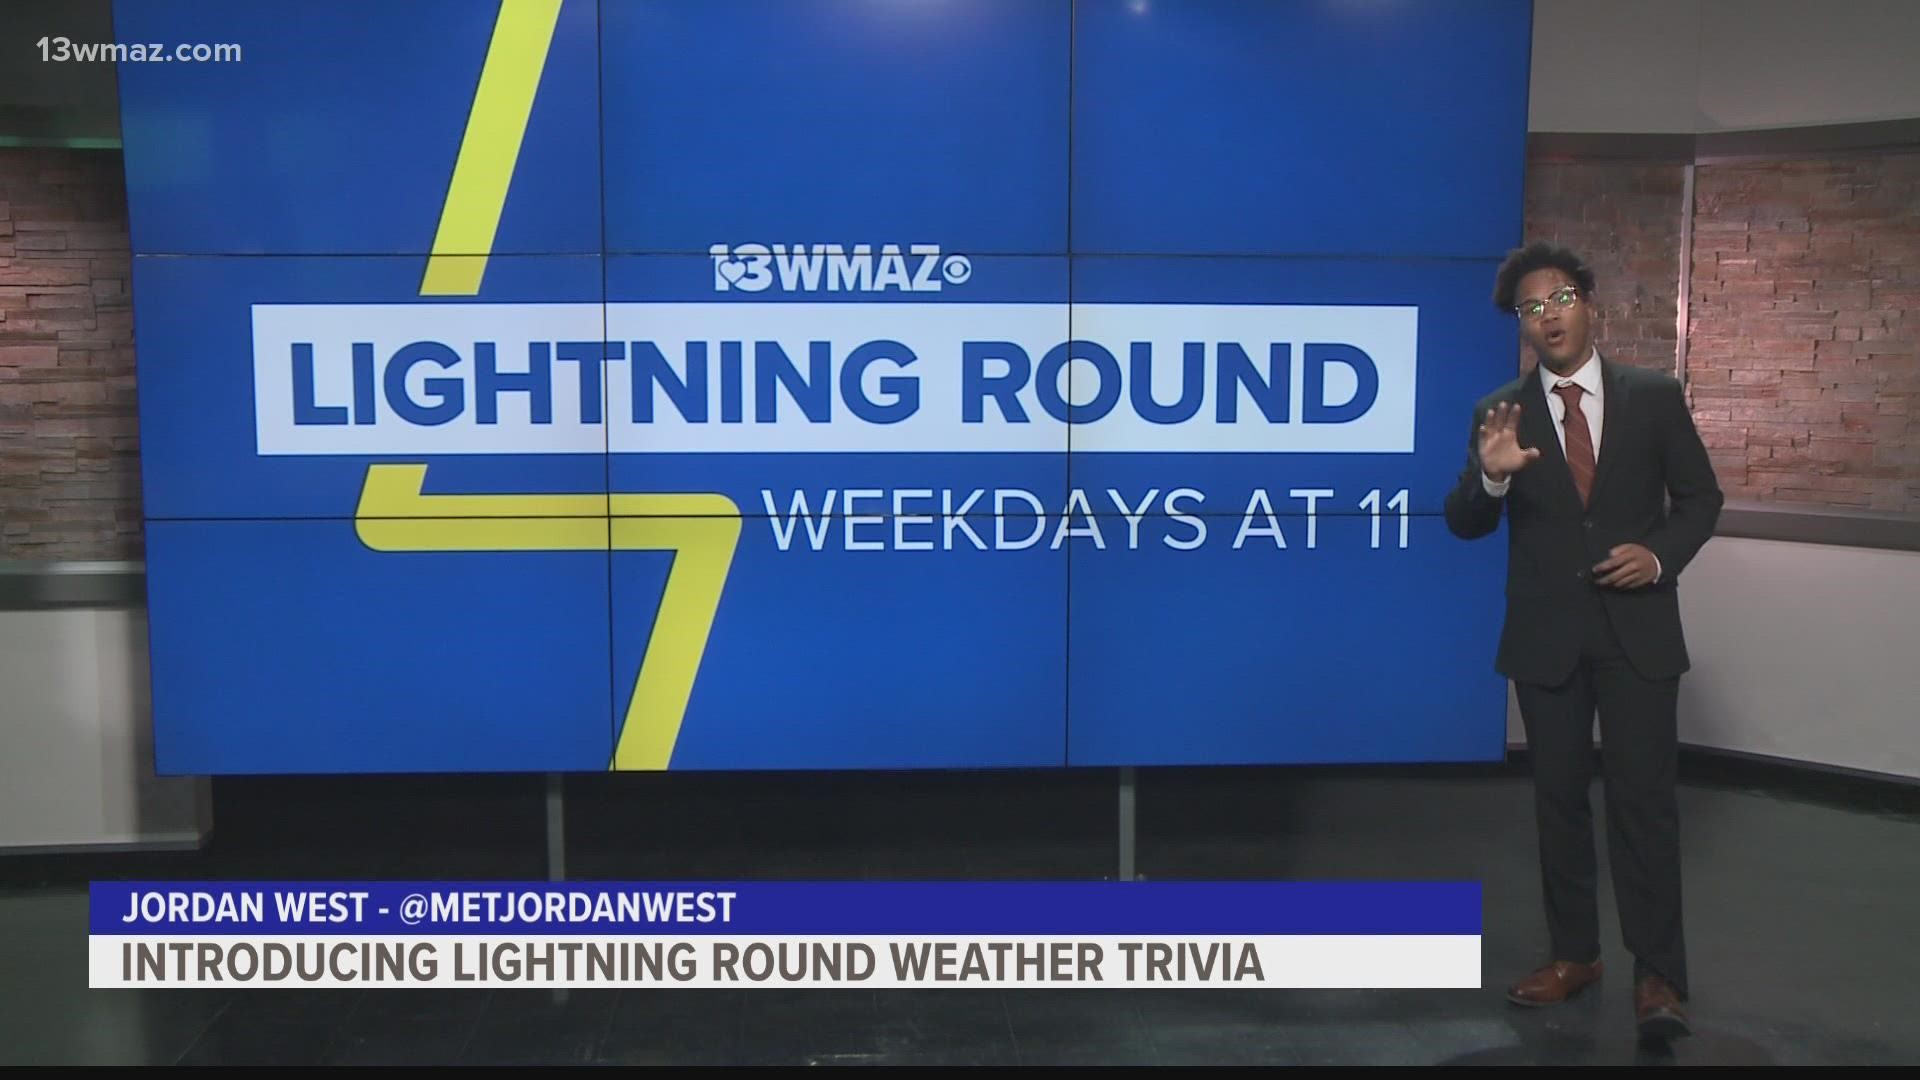 Hold on to your lightning bolt and let's play some trivia!